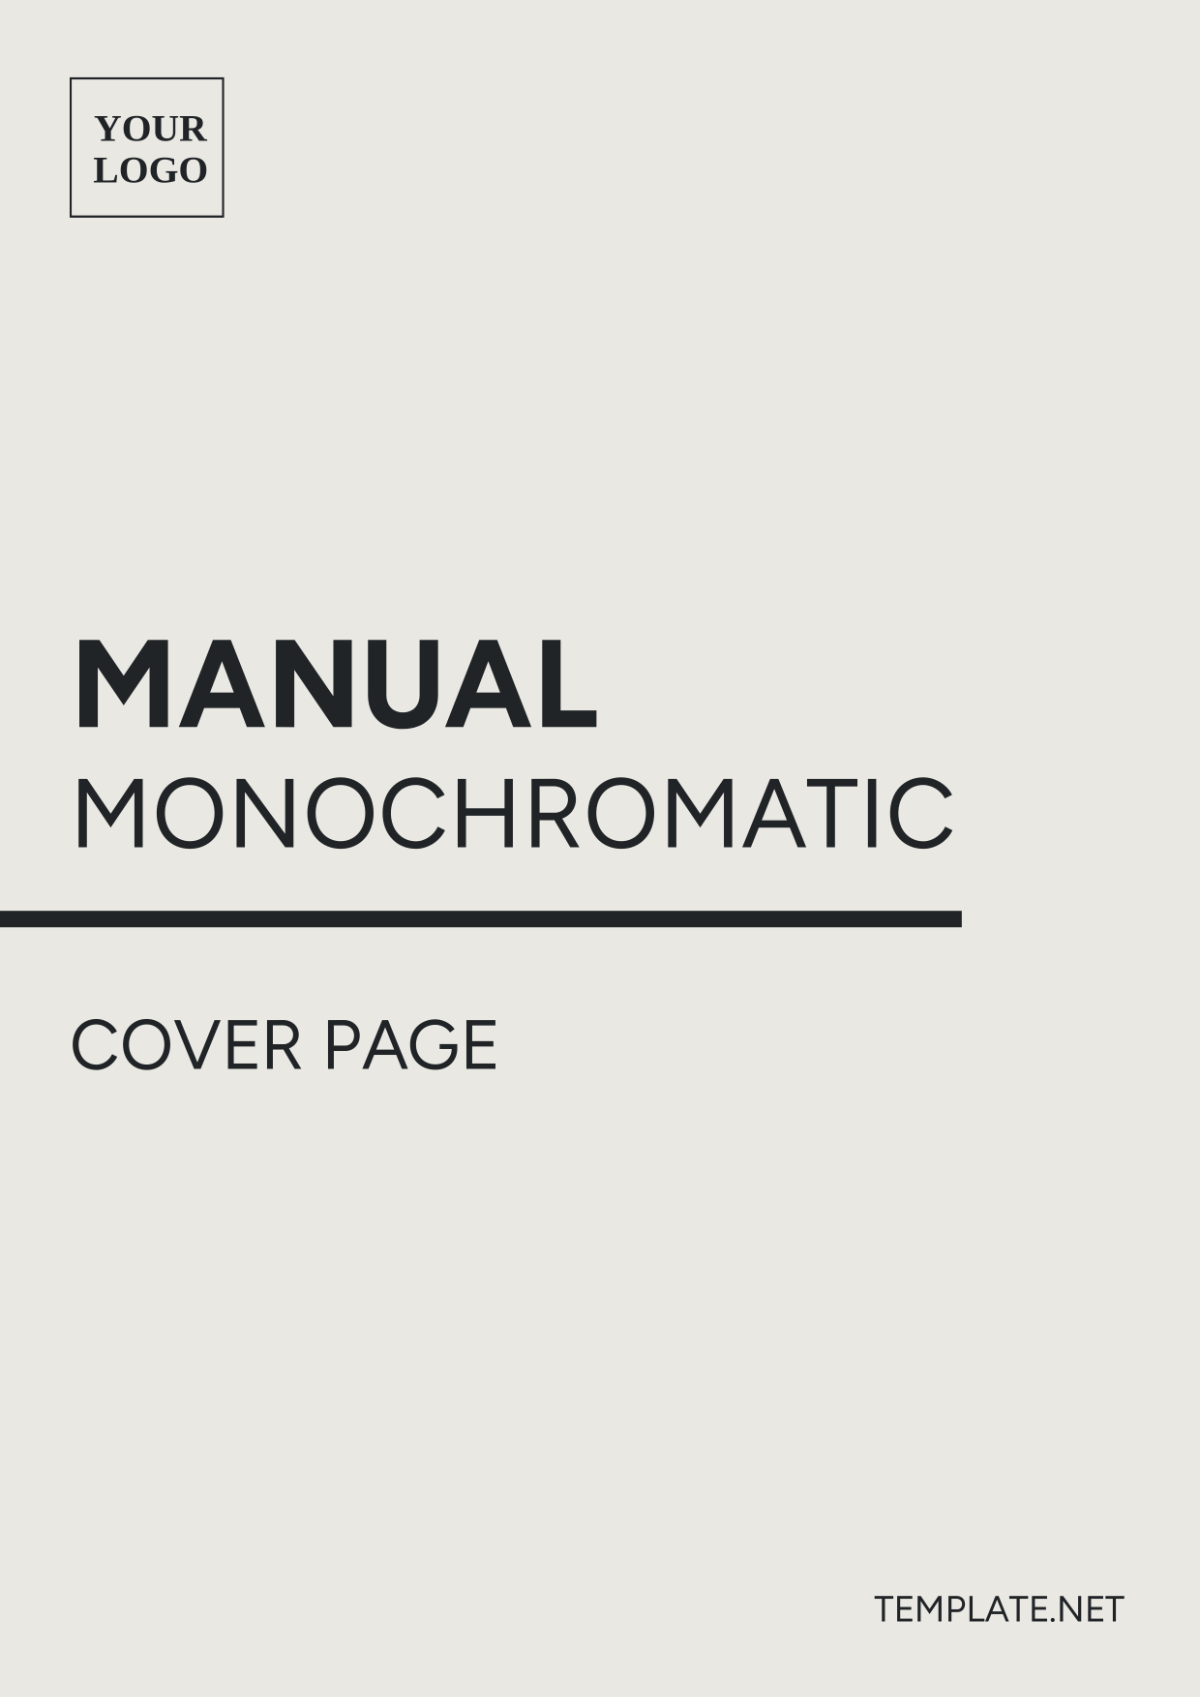 Manual Monochromatic Cover Page Template